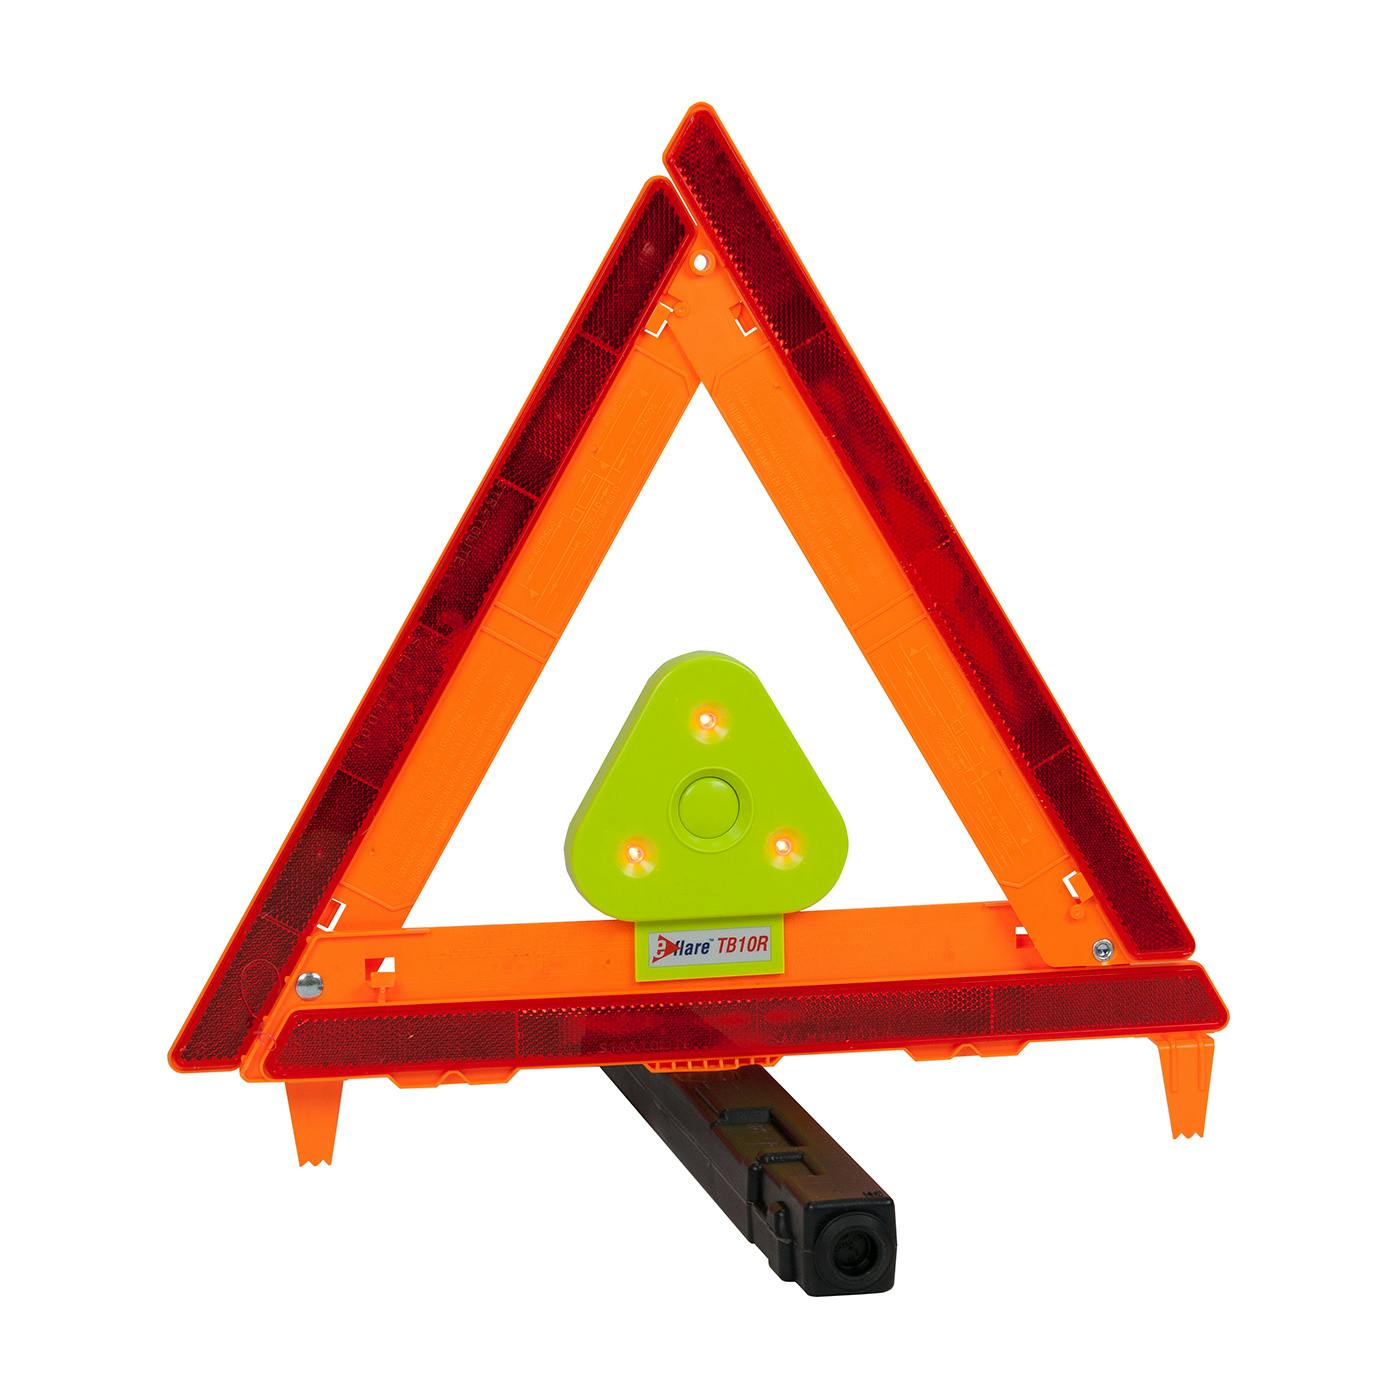 Safety & Emergency Beacon for Safety Triangles - Flashing Red, Red (939-TB10-R) - 4_0